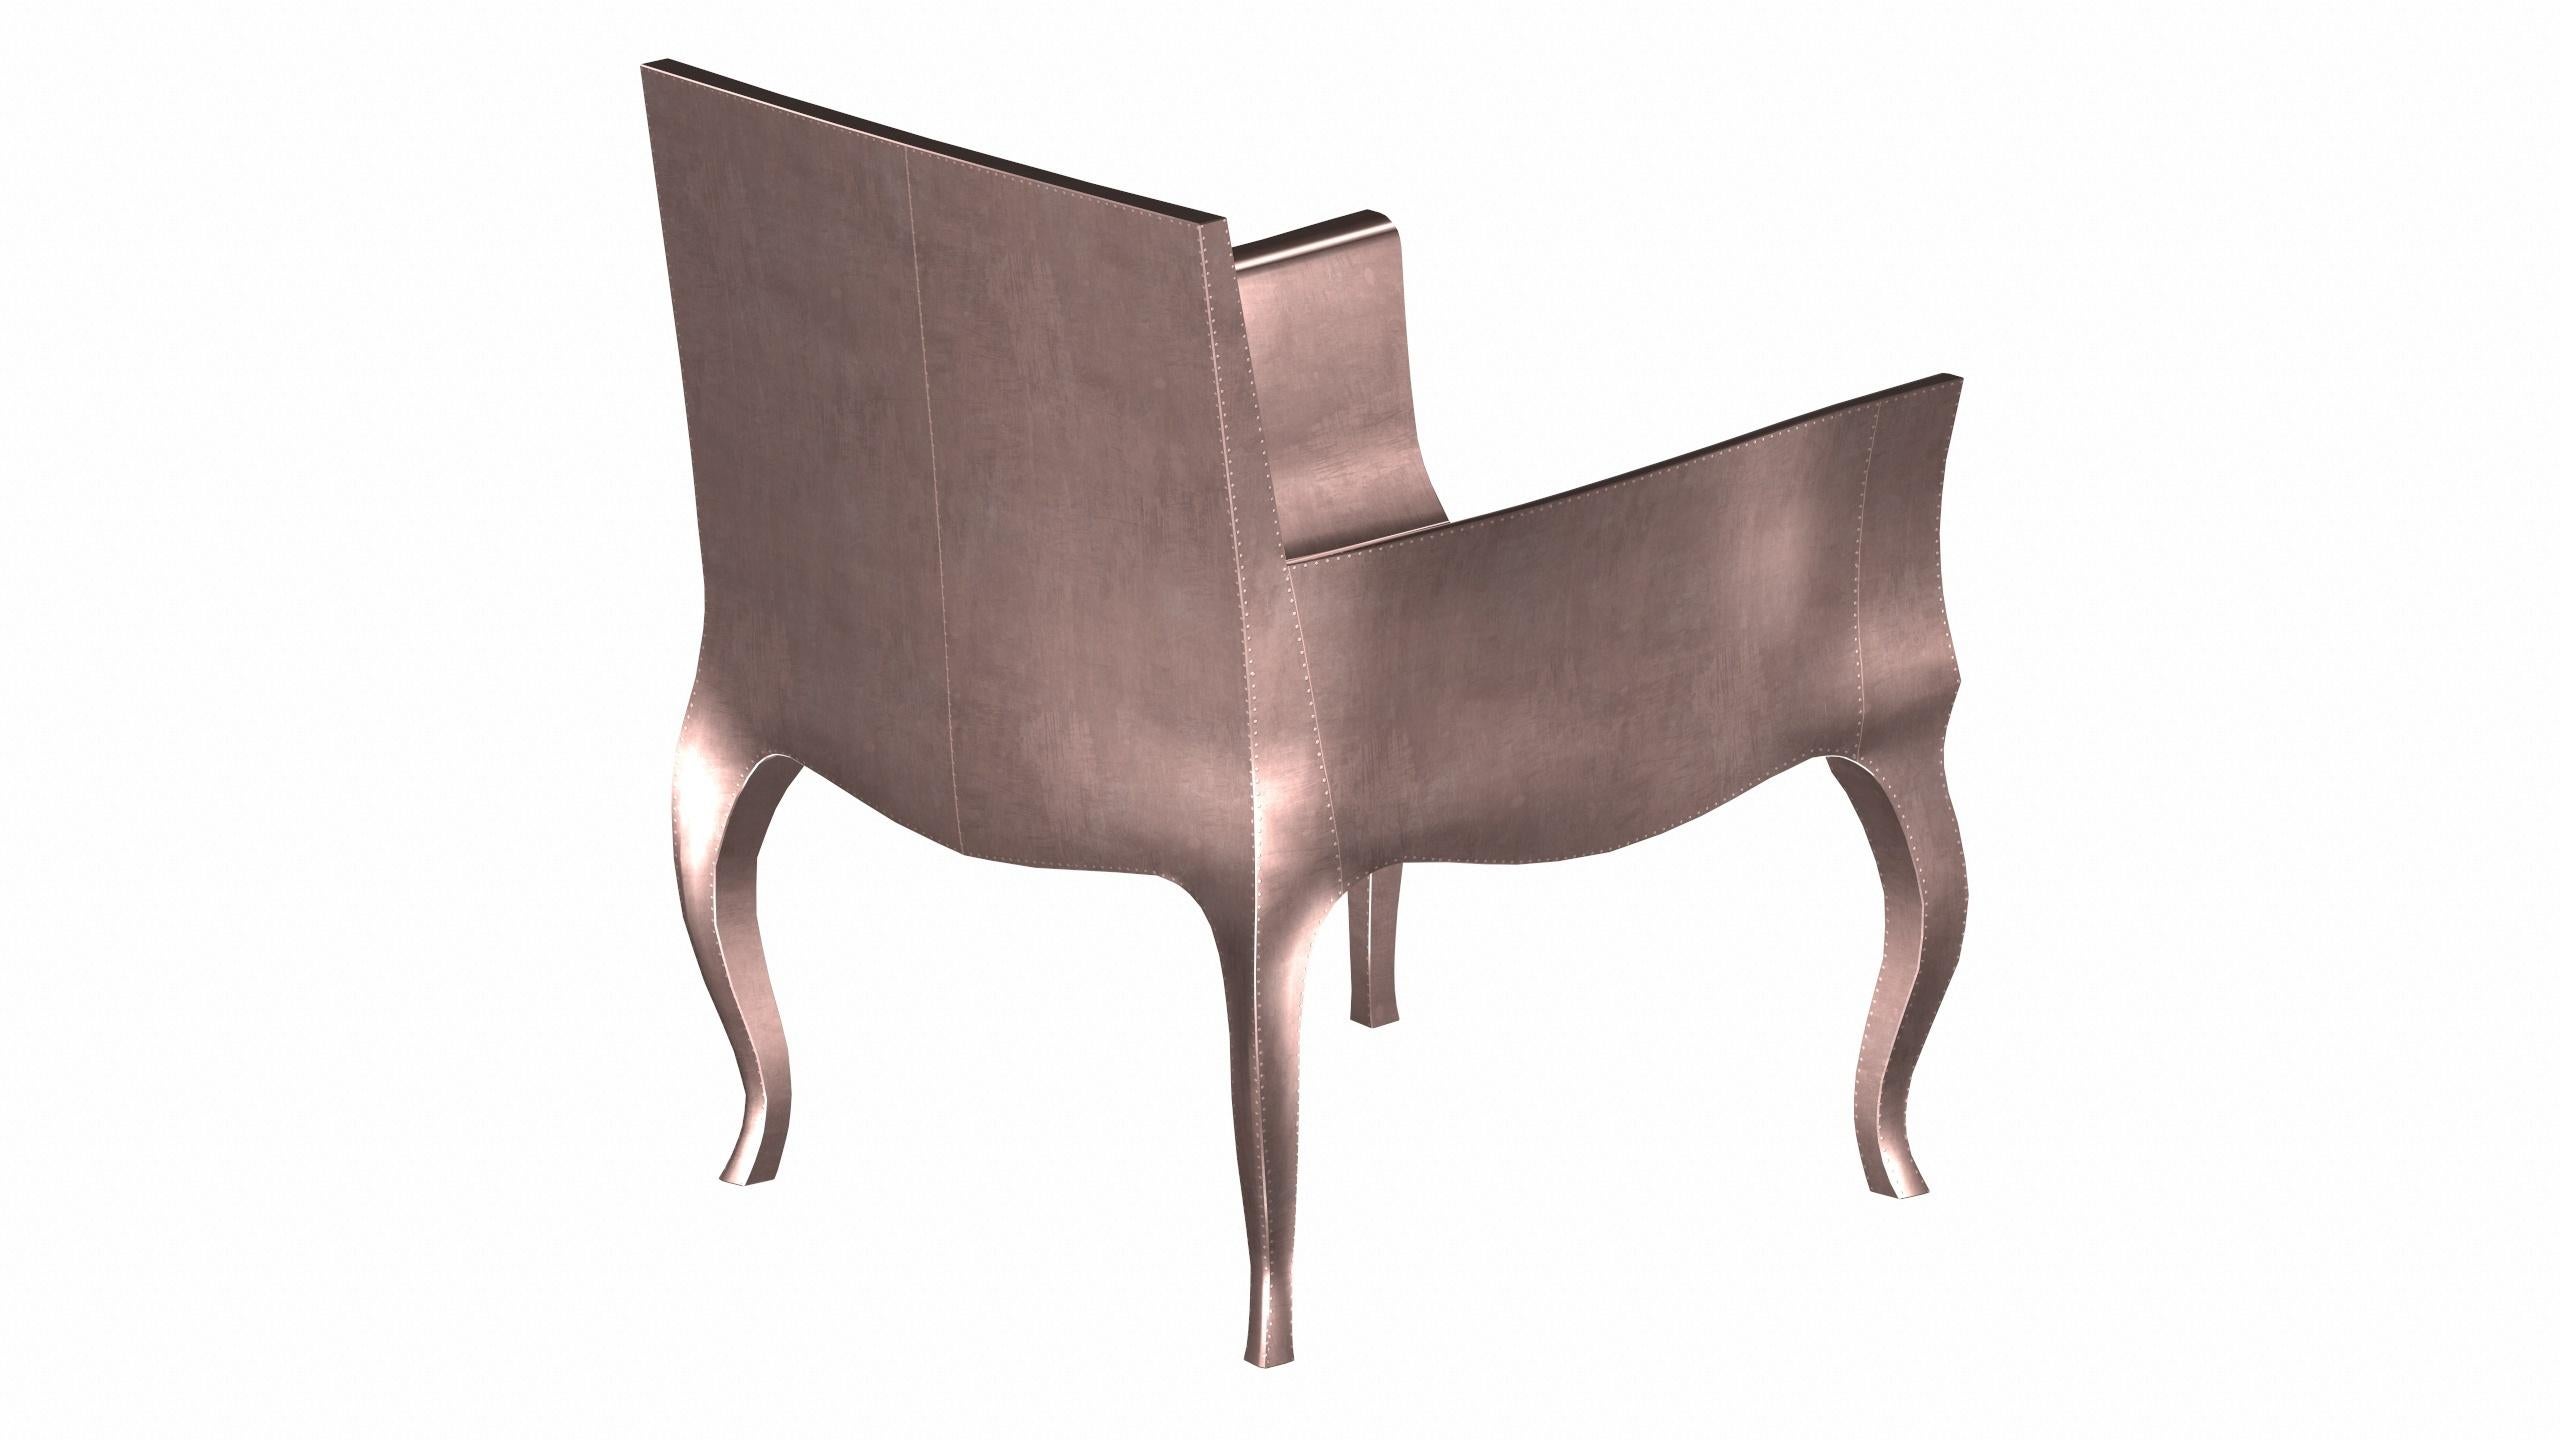 Indian Art Deco Desk Chair in Smooth Copper by Paul Mathieu for S. Odegard For Sale